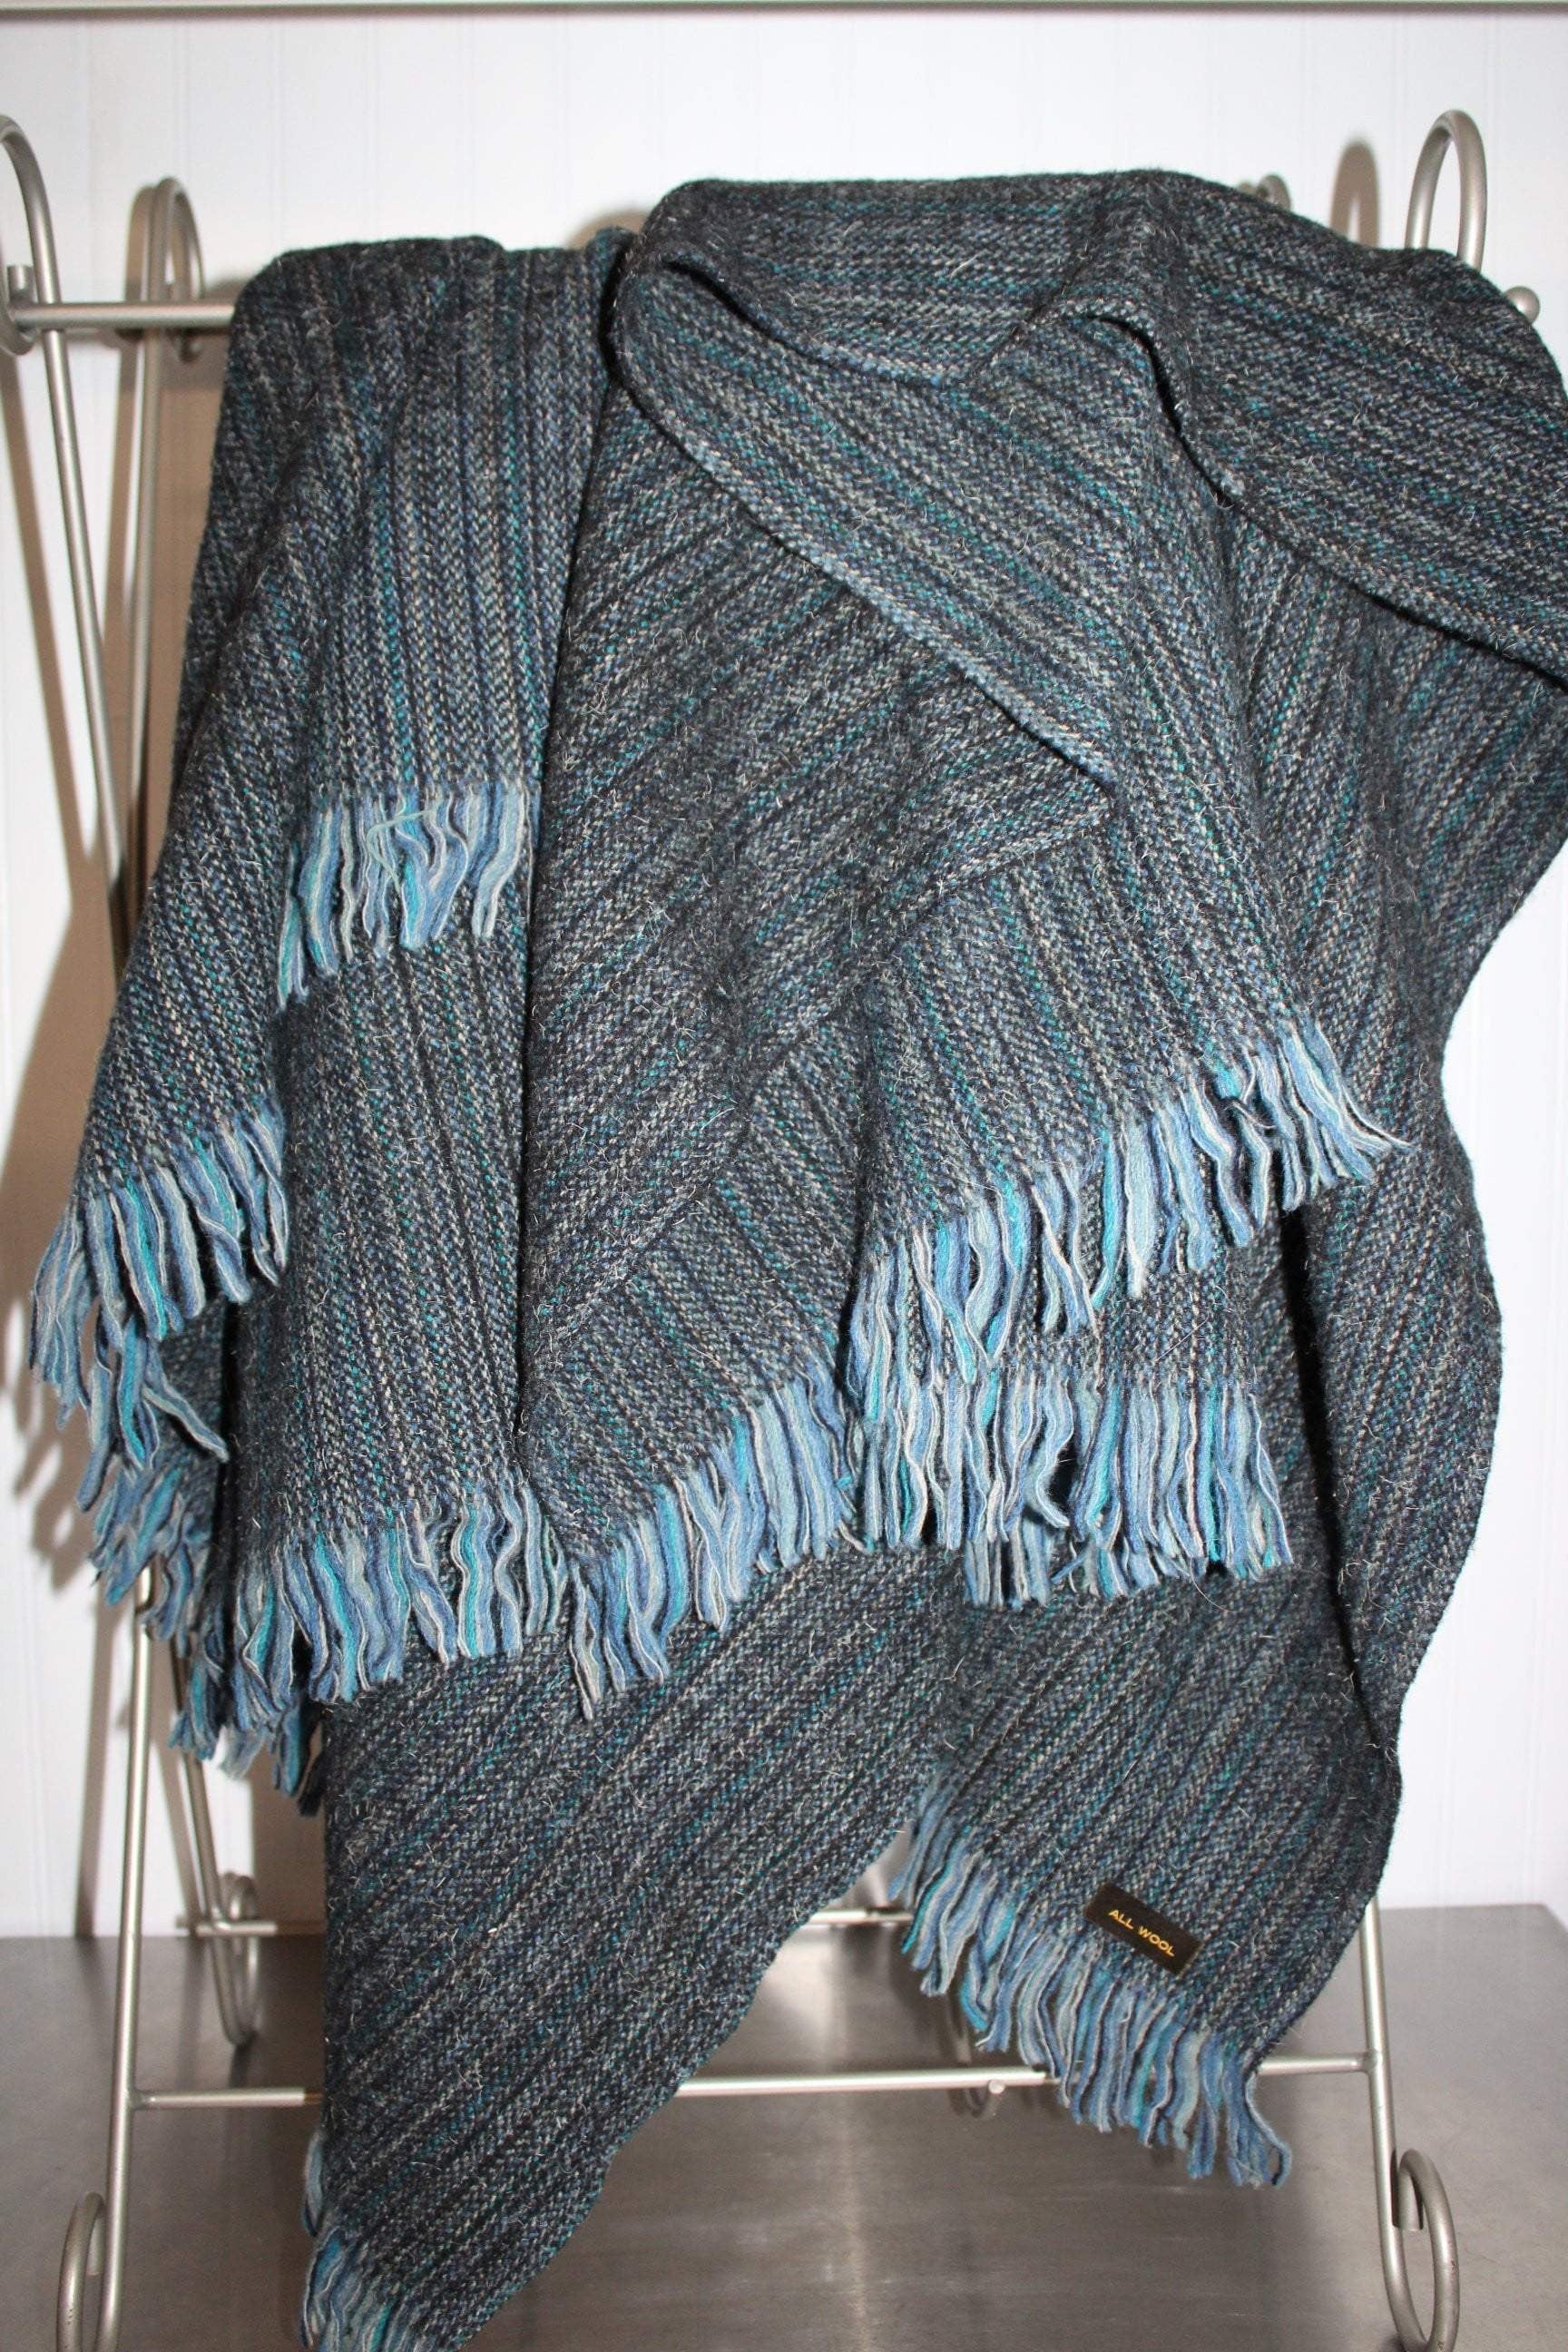 Handsome Wool Throw Blanket Shades of Blue Mixed Linear Woven Fiber 61" X 64" + Fringe unusual